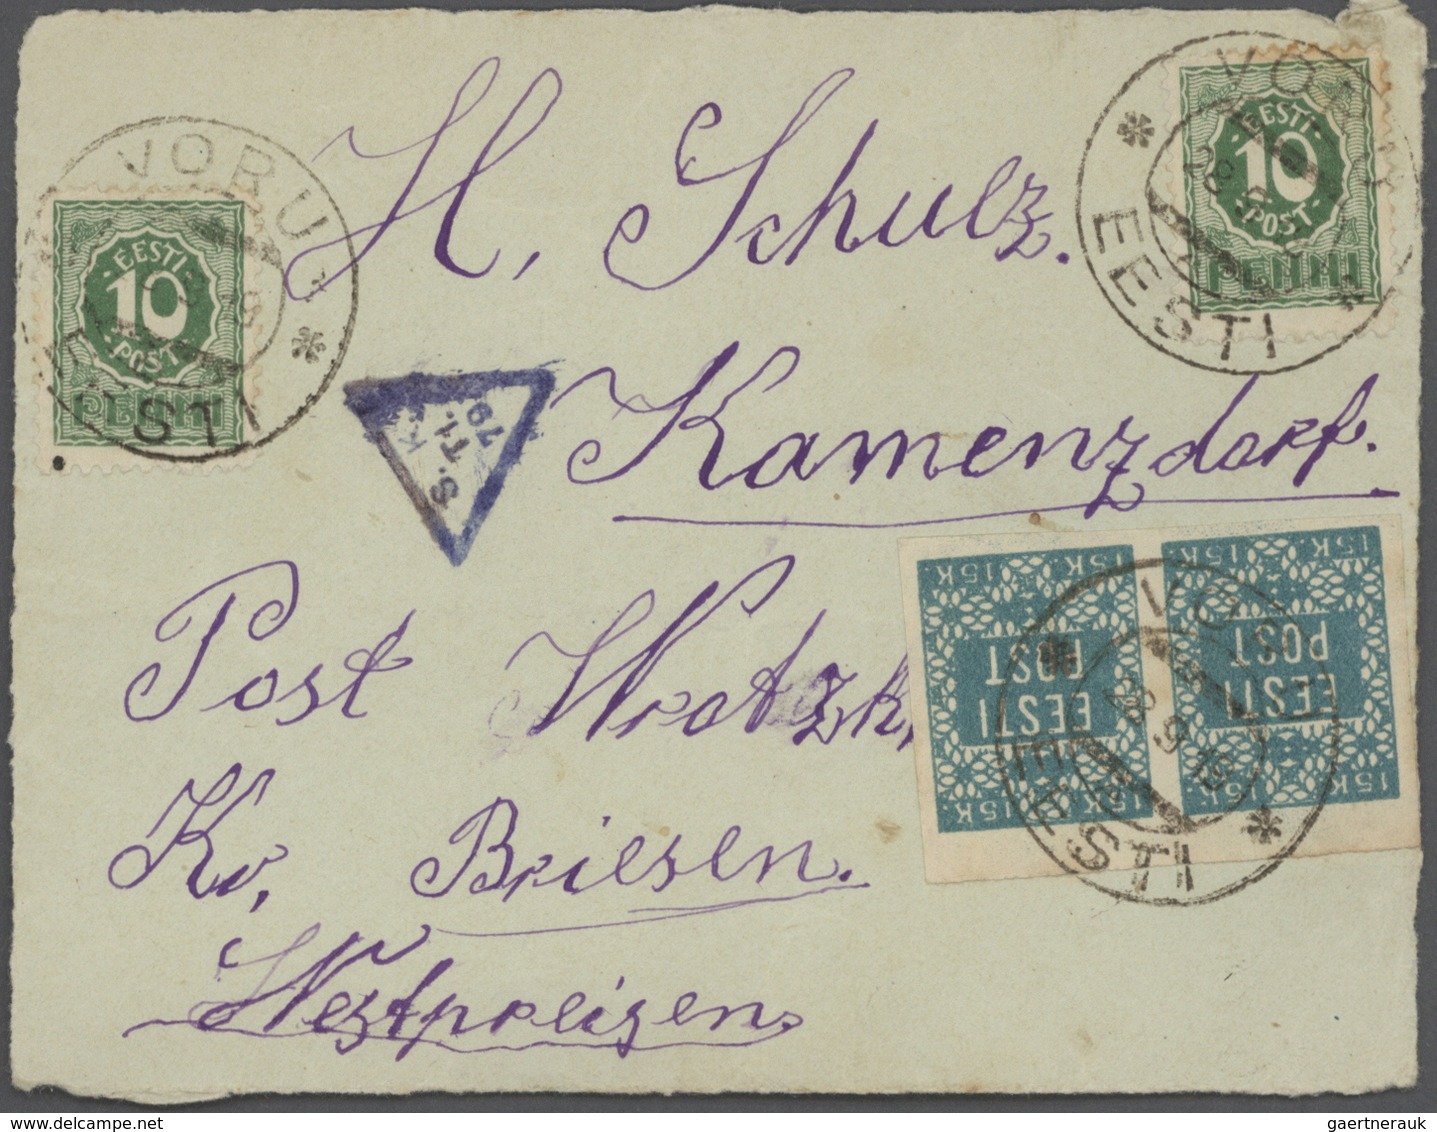 24536 Alle Welt: ca. 1862 till 1940, Box containing 735 covers & cards Europe & Overseas, including Japan,